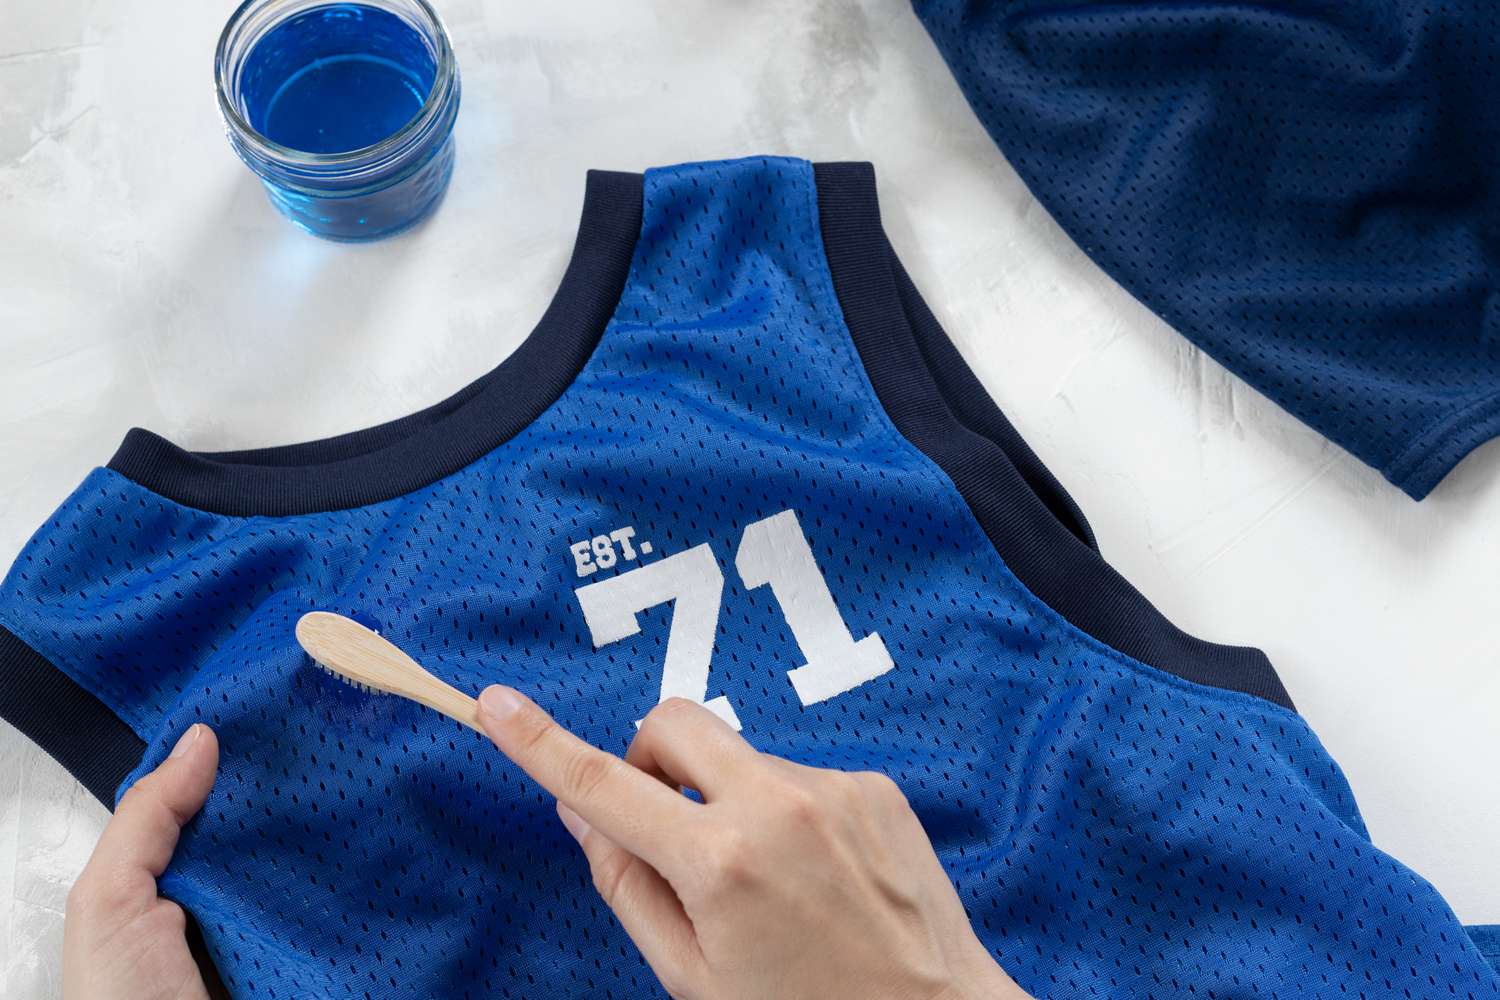 Blue basketball jersey scrubbed with old toothbrush and laundry detergent to treat blood stains